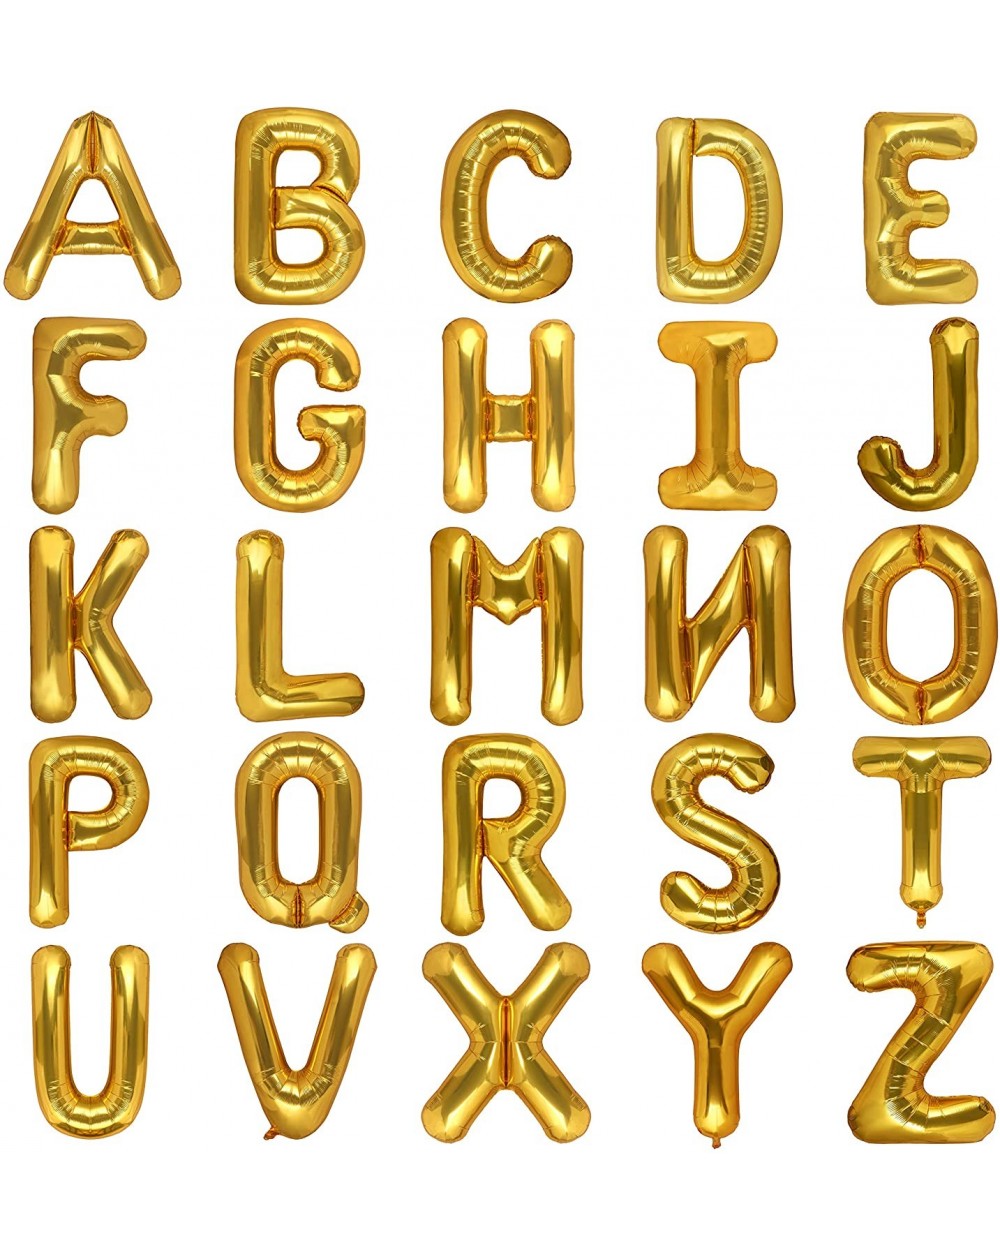 Balloons 40 Inch Giant Gold Letter M Balloon Birthday Party Decorations Mylar Foil Big Alphabet Helium Balloon - Letter M - C...